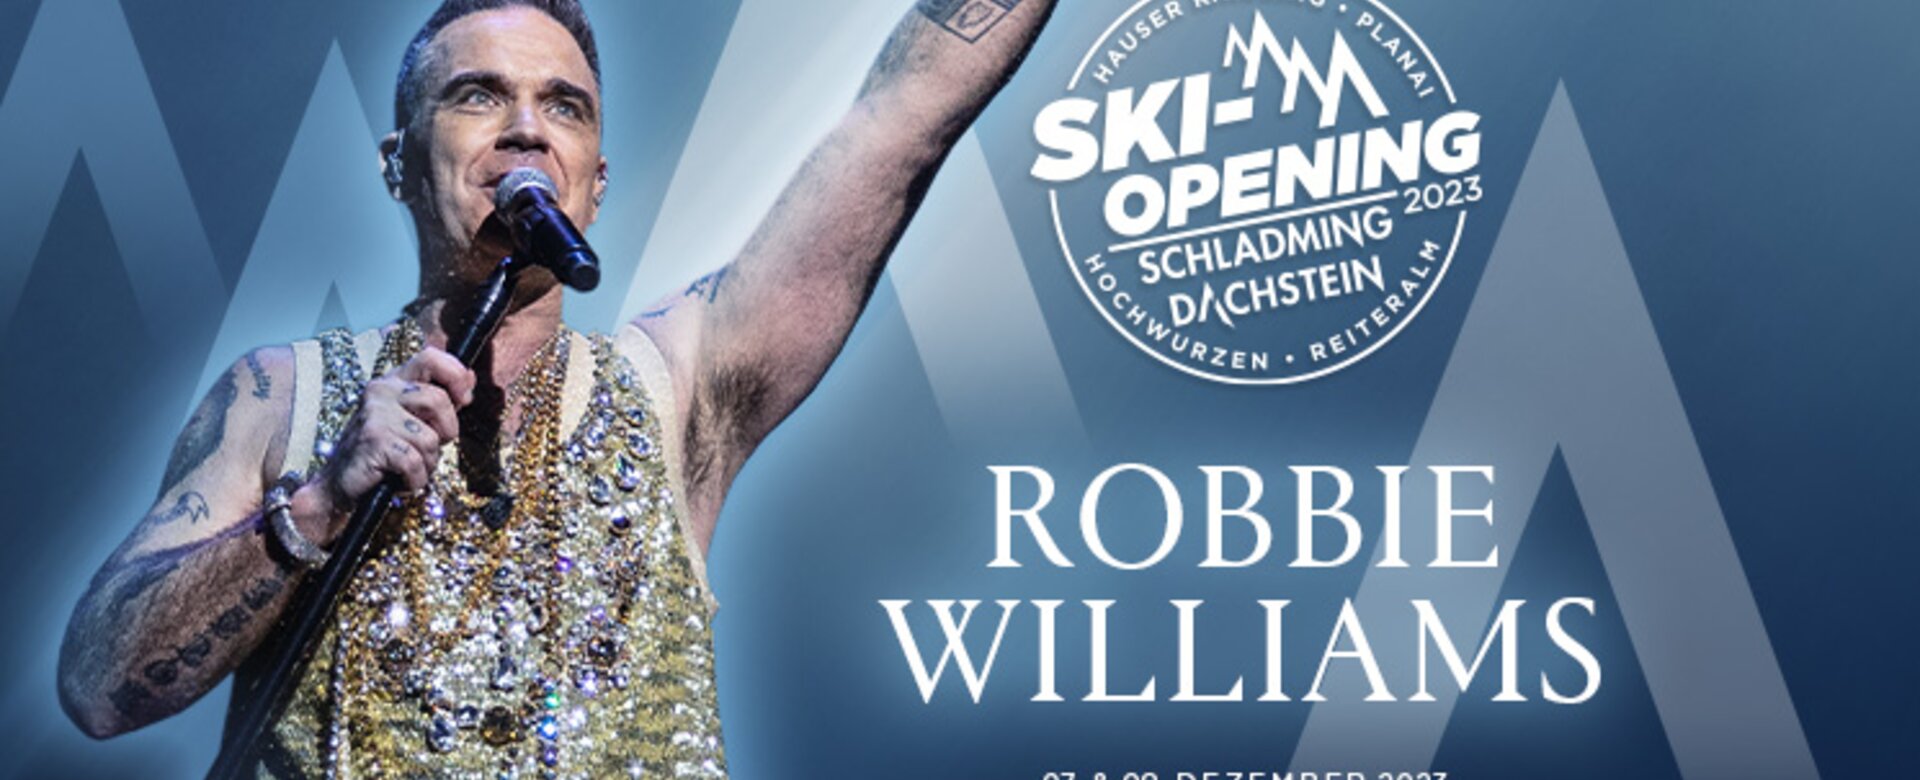 Robbie Williams is coming to Schladming-Dachstein for the Ski Opening on 7 and 8 December 2023.